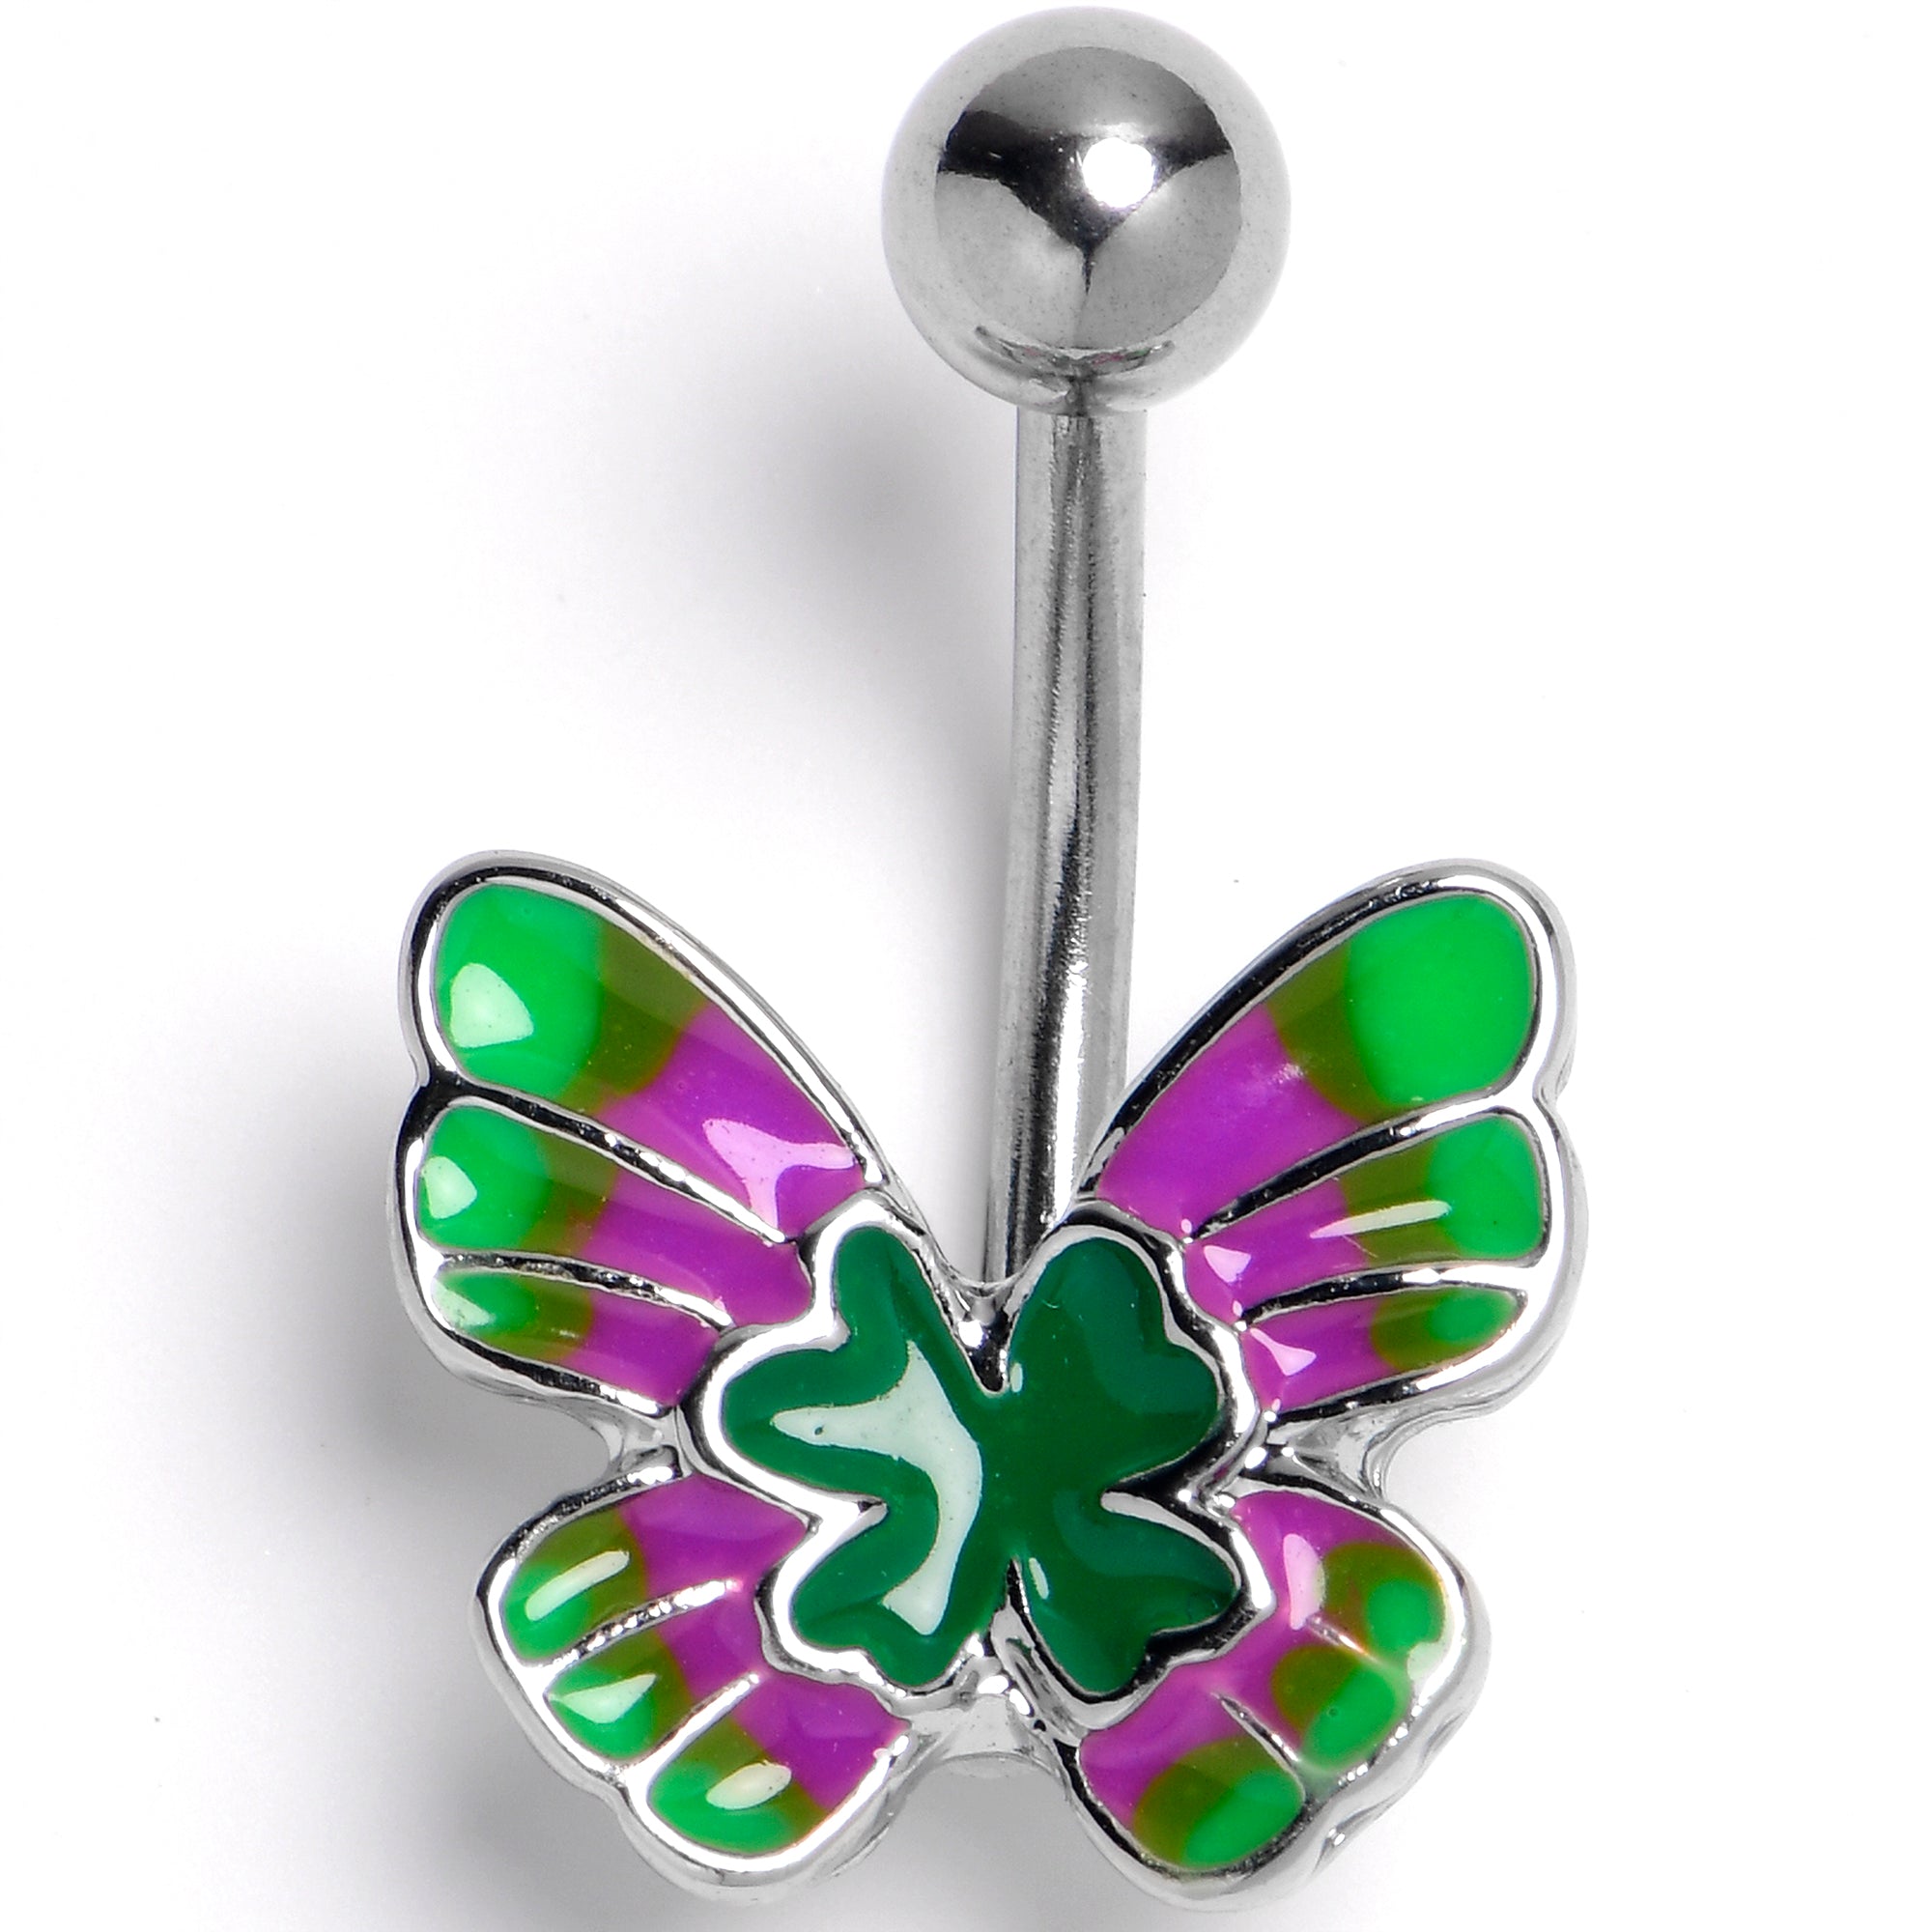 14 Gauge 3/8 Vibrant Grace Butterfly Belly Ring